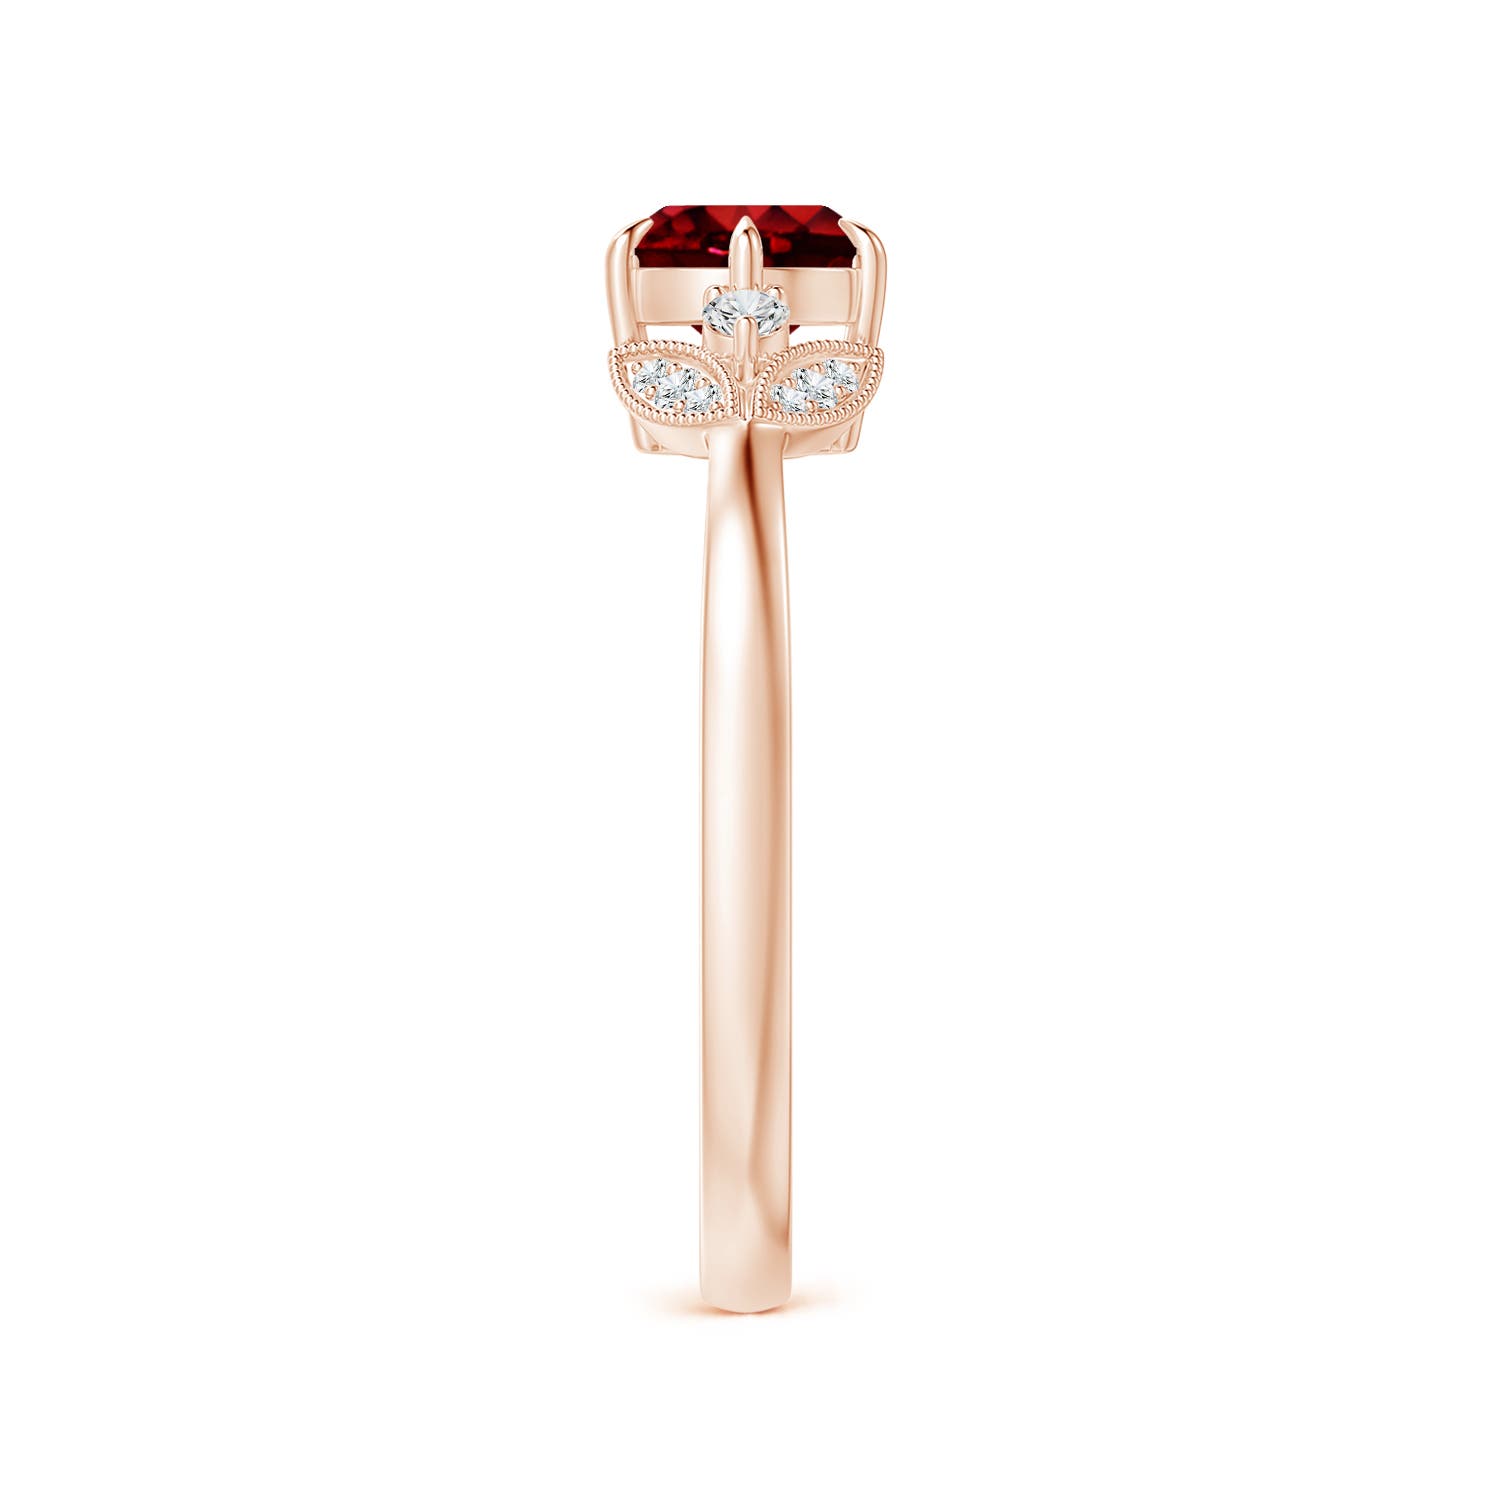 AAAA - Ruby / 1.1 CT / 14 KT Rose Gold